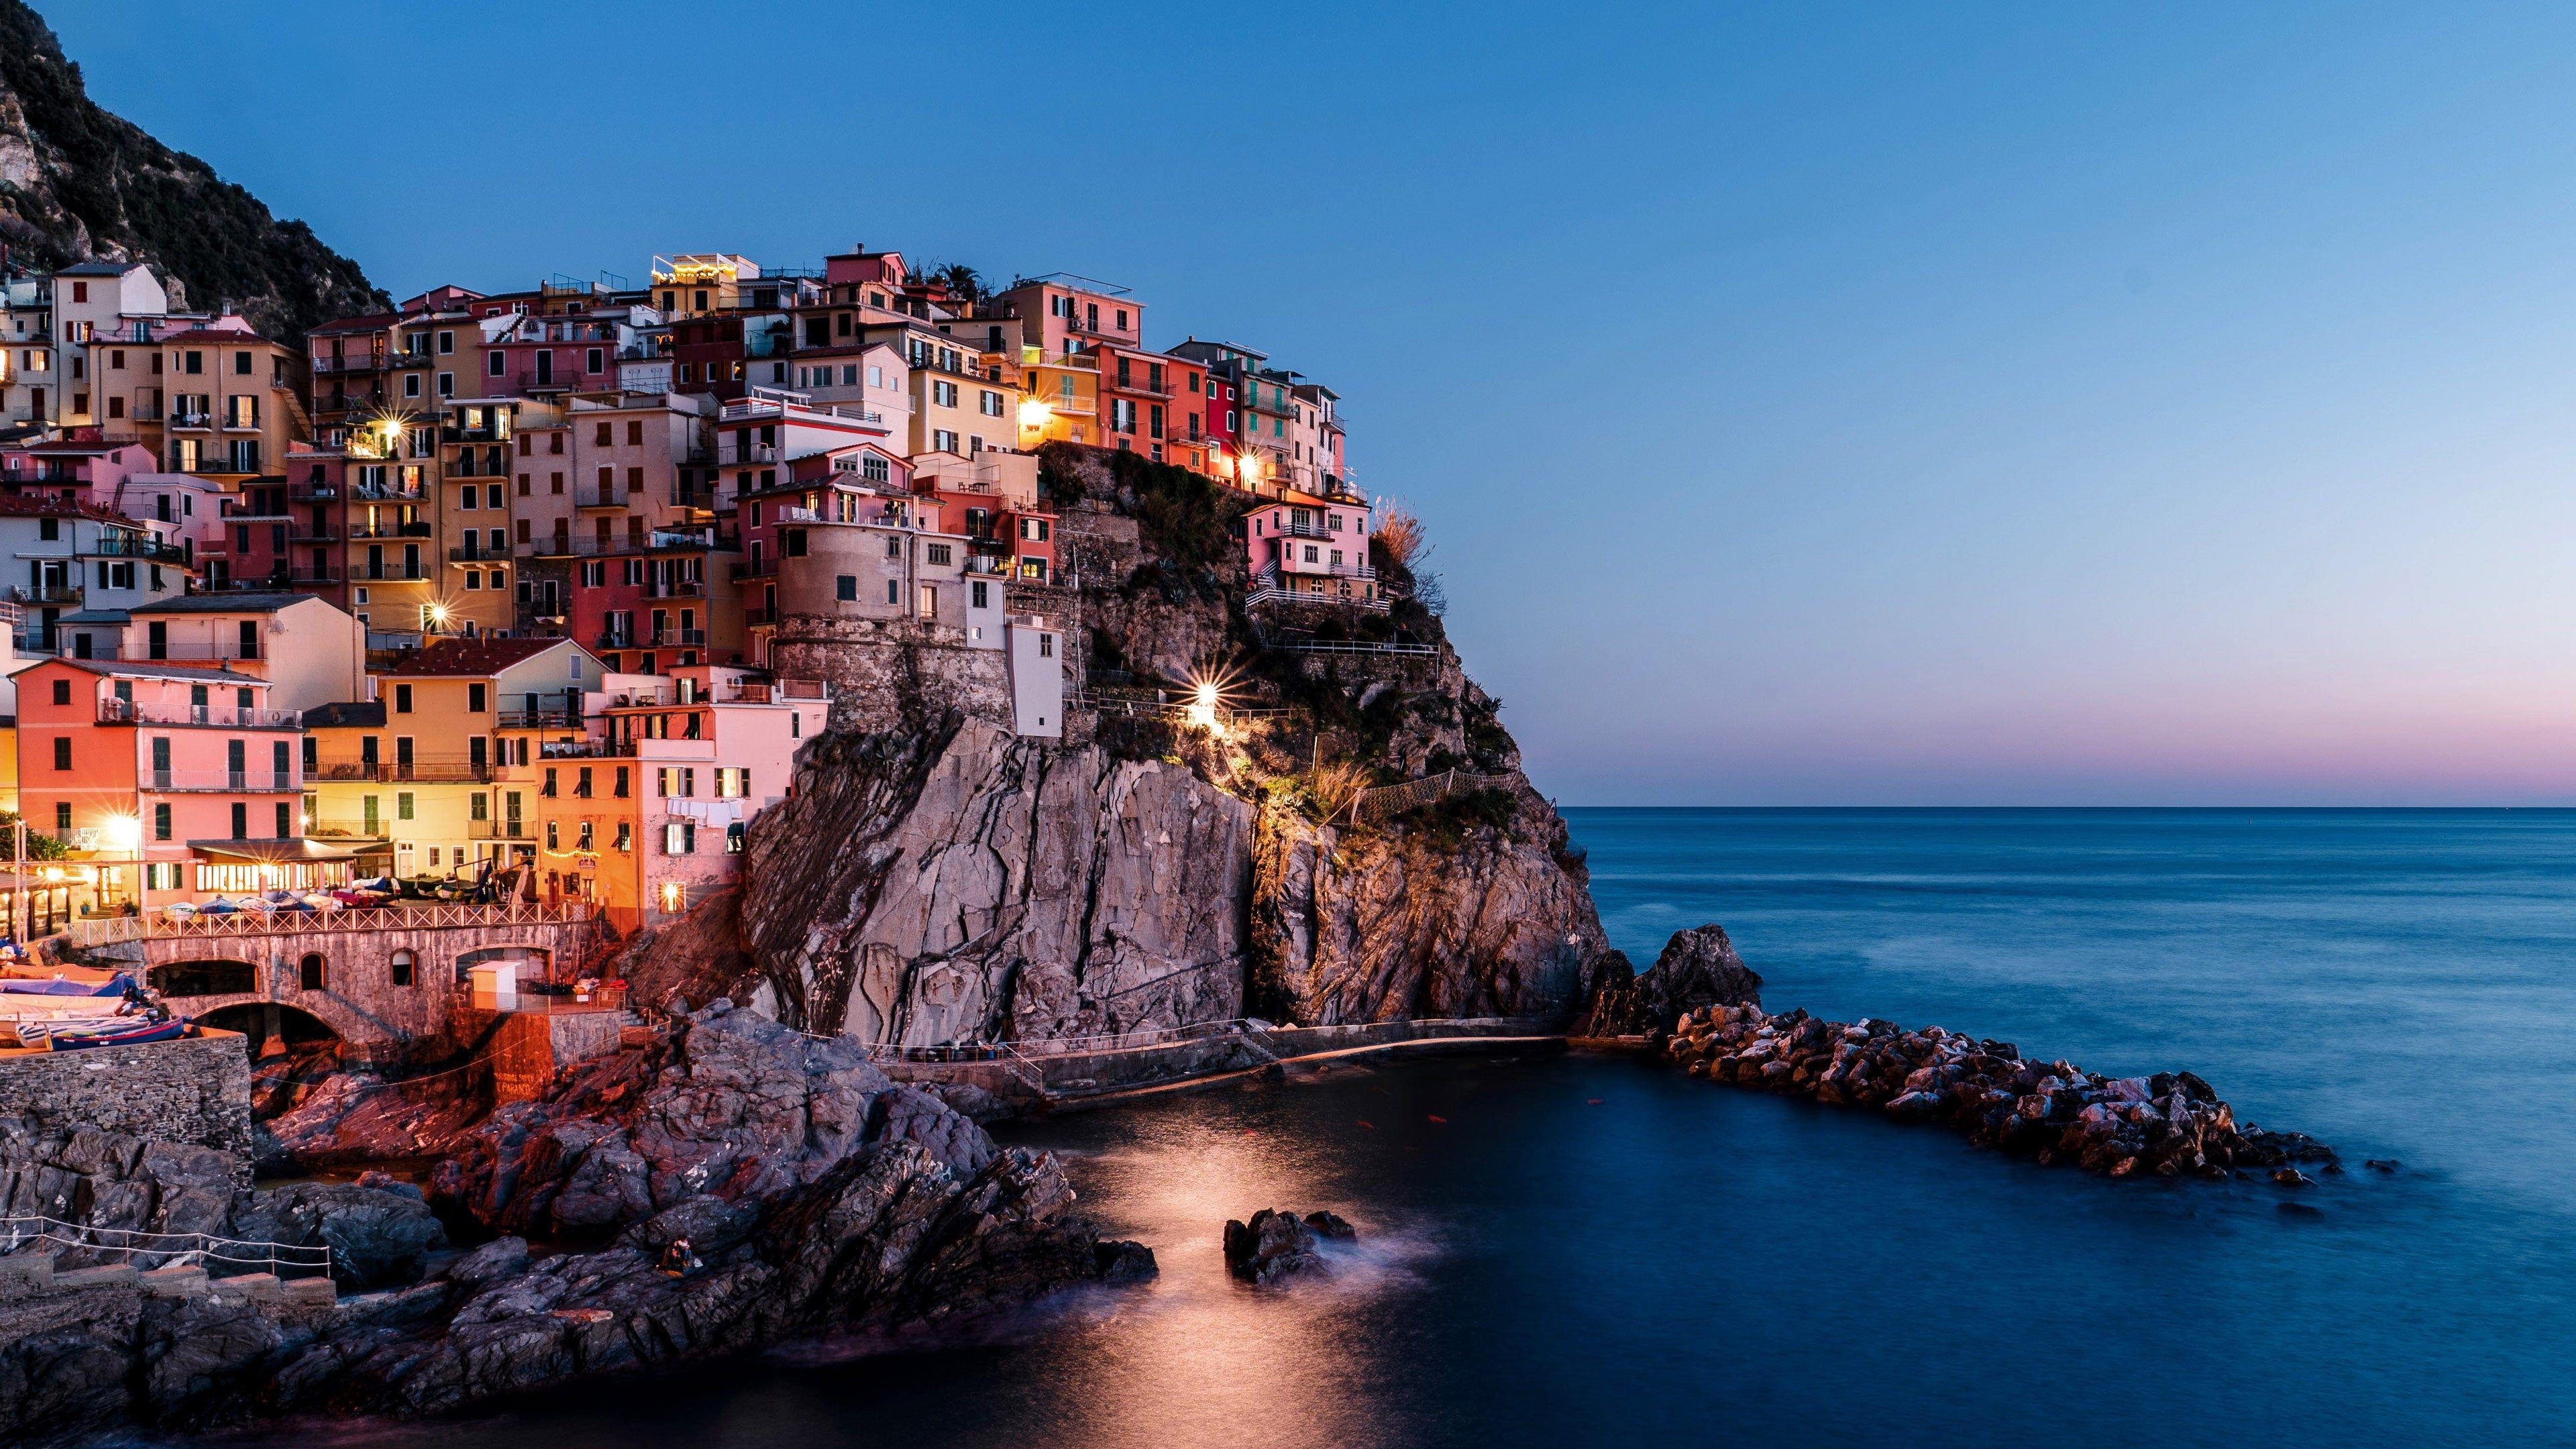 4K Italy Wallpapers - Top Free 4K Italy Backgrounds ...